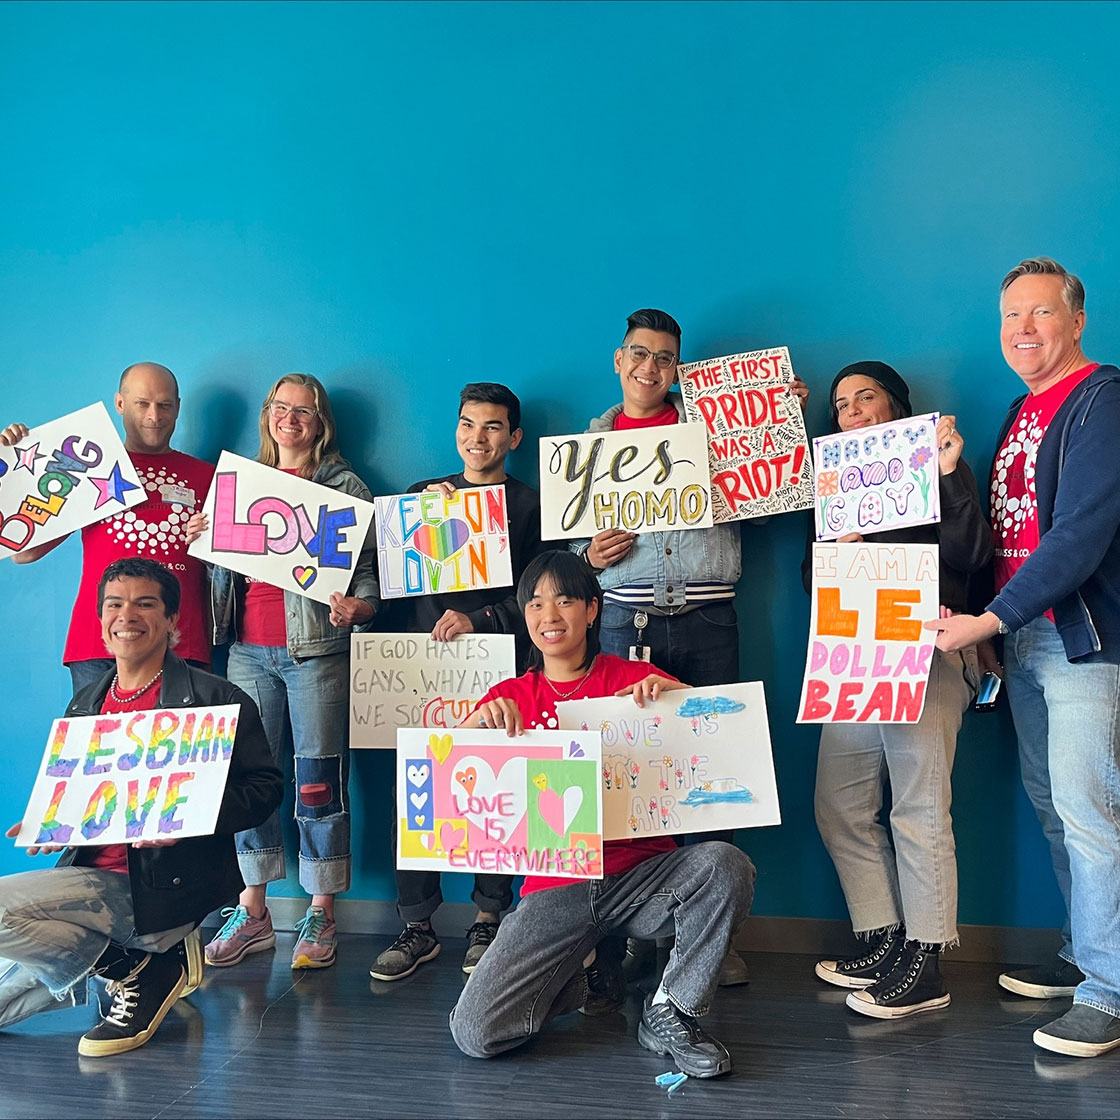 A group of LS&Co. employee volunteers pose with homemade signs at the SF LGBT center featuring words and phrases in support of LGBTQ+ rights.